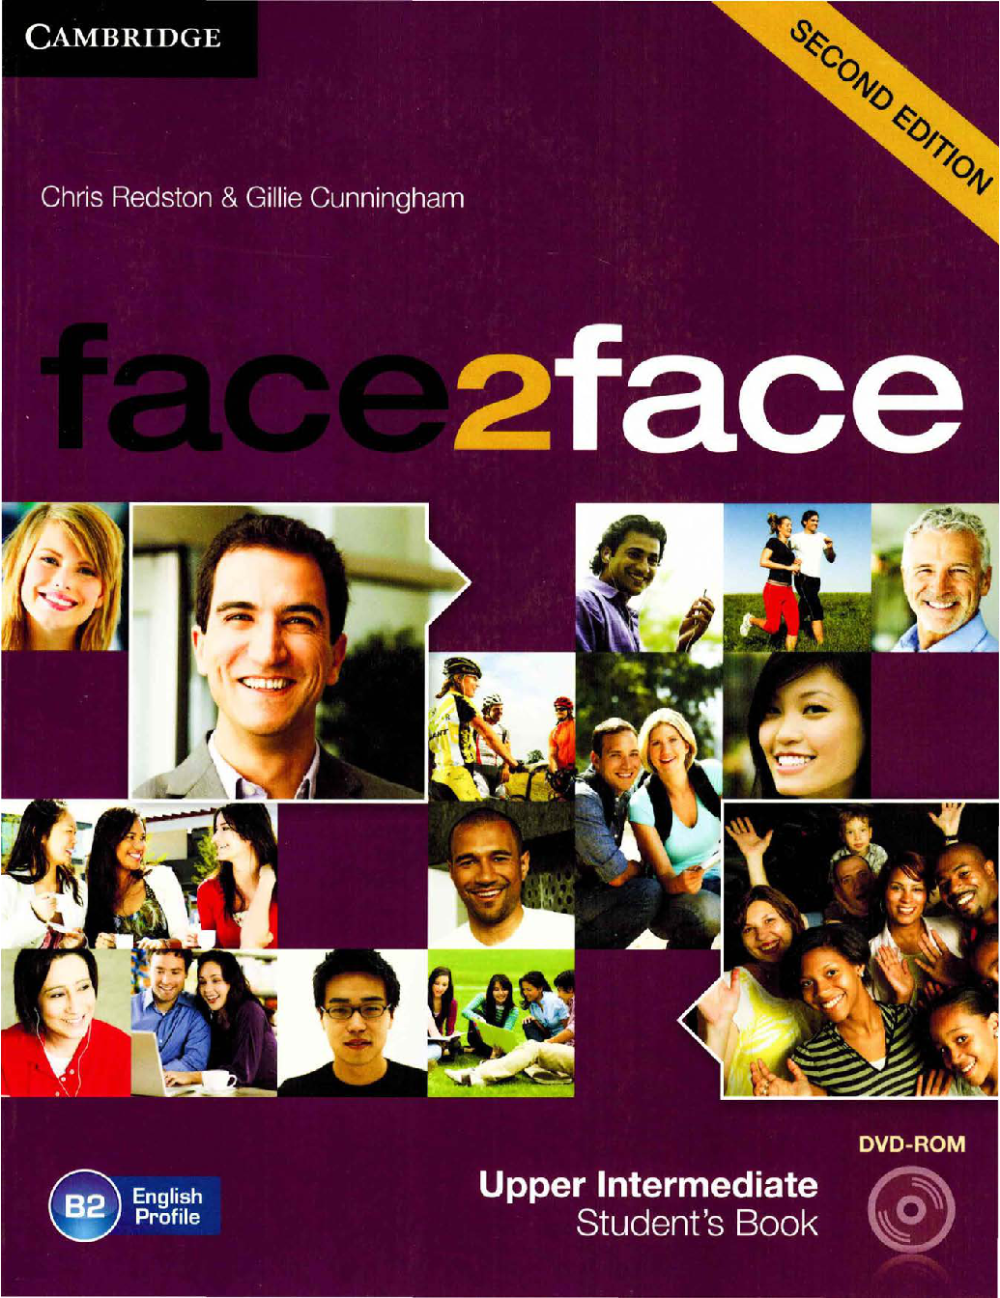 face2face second edition pdf free download